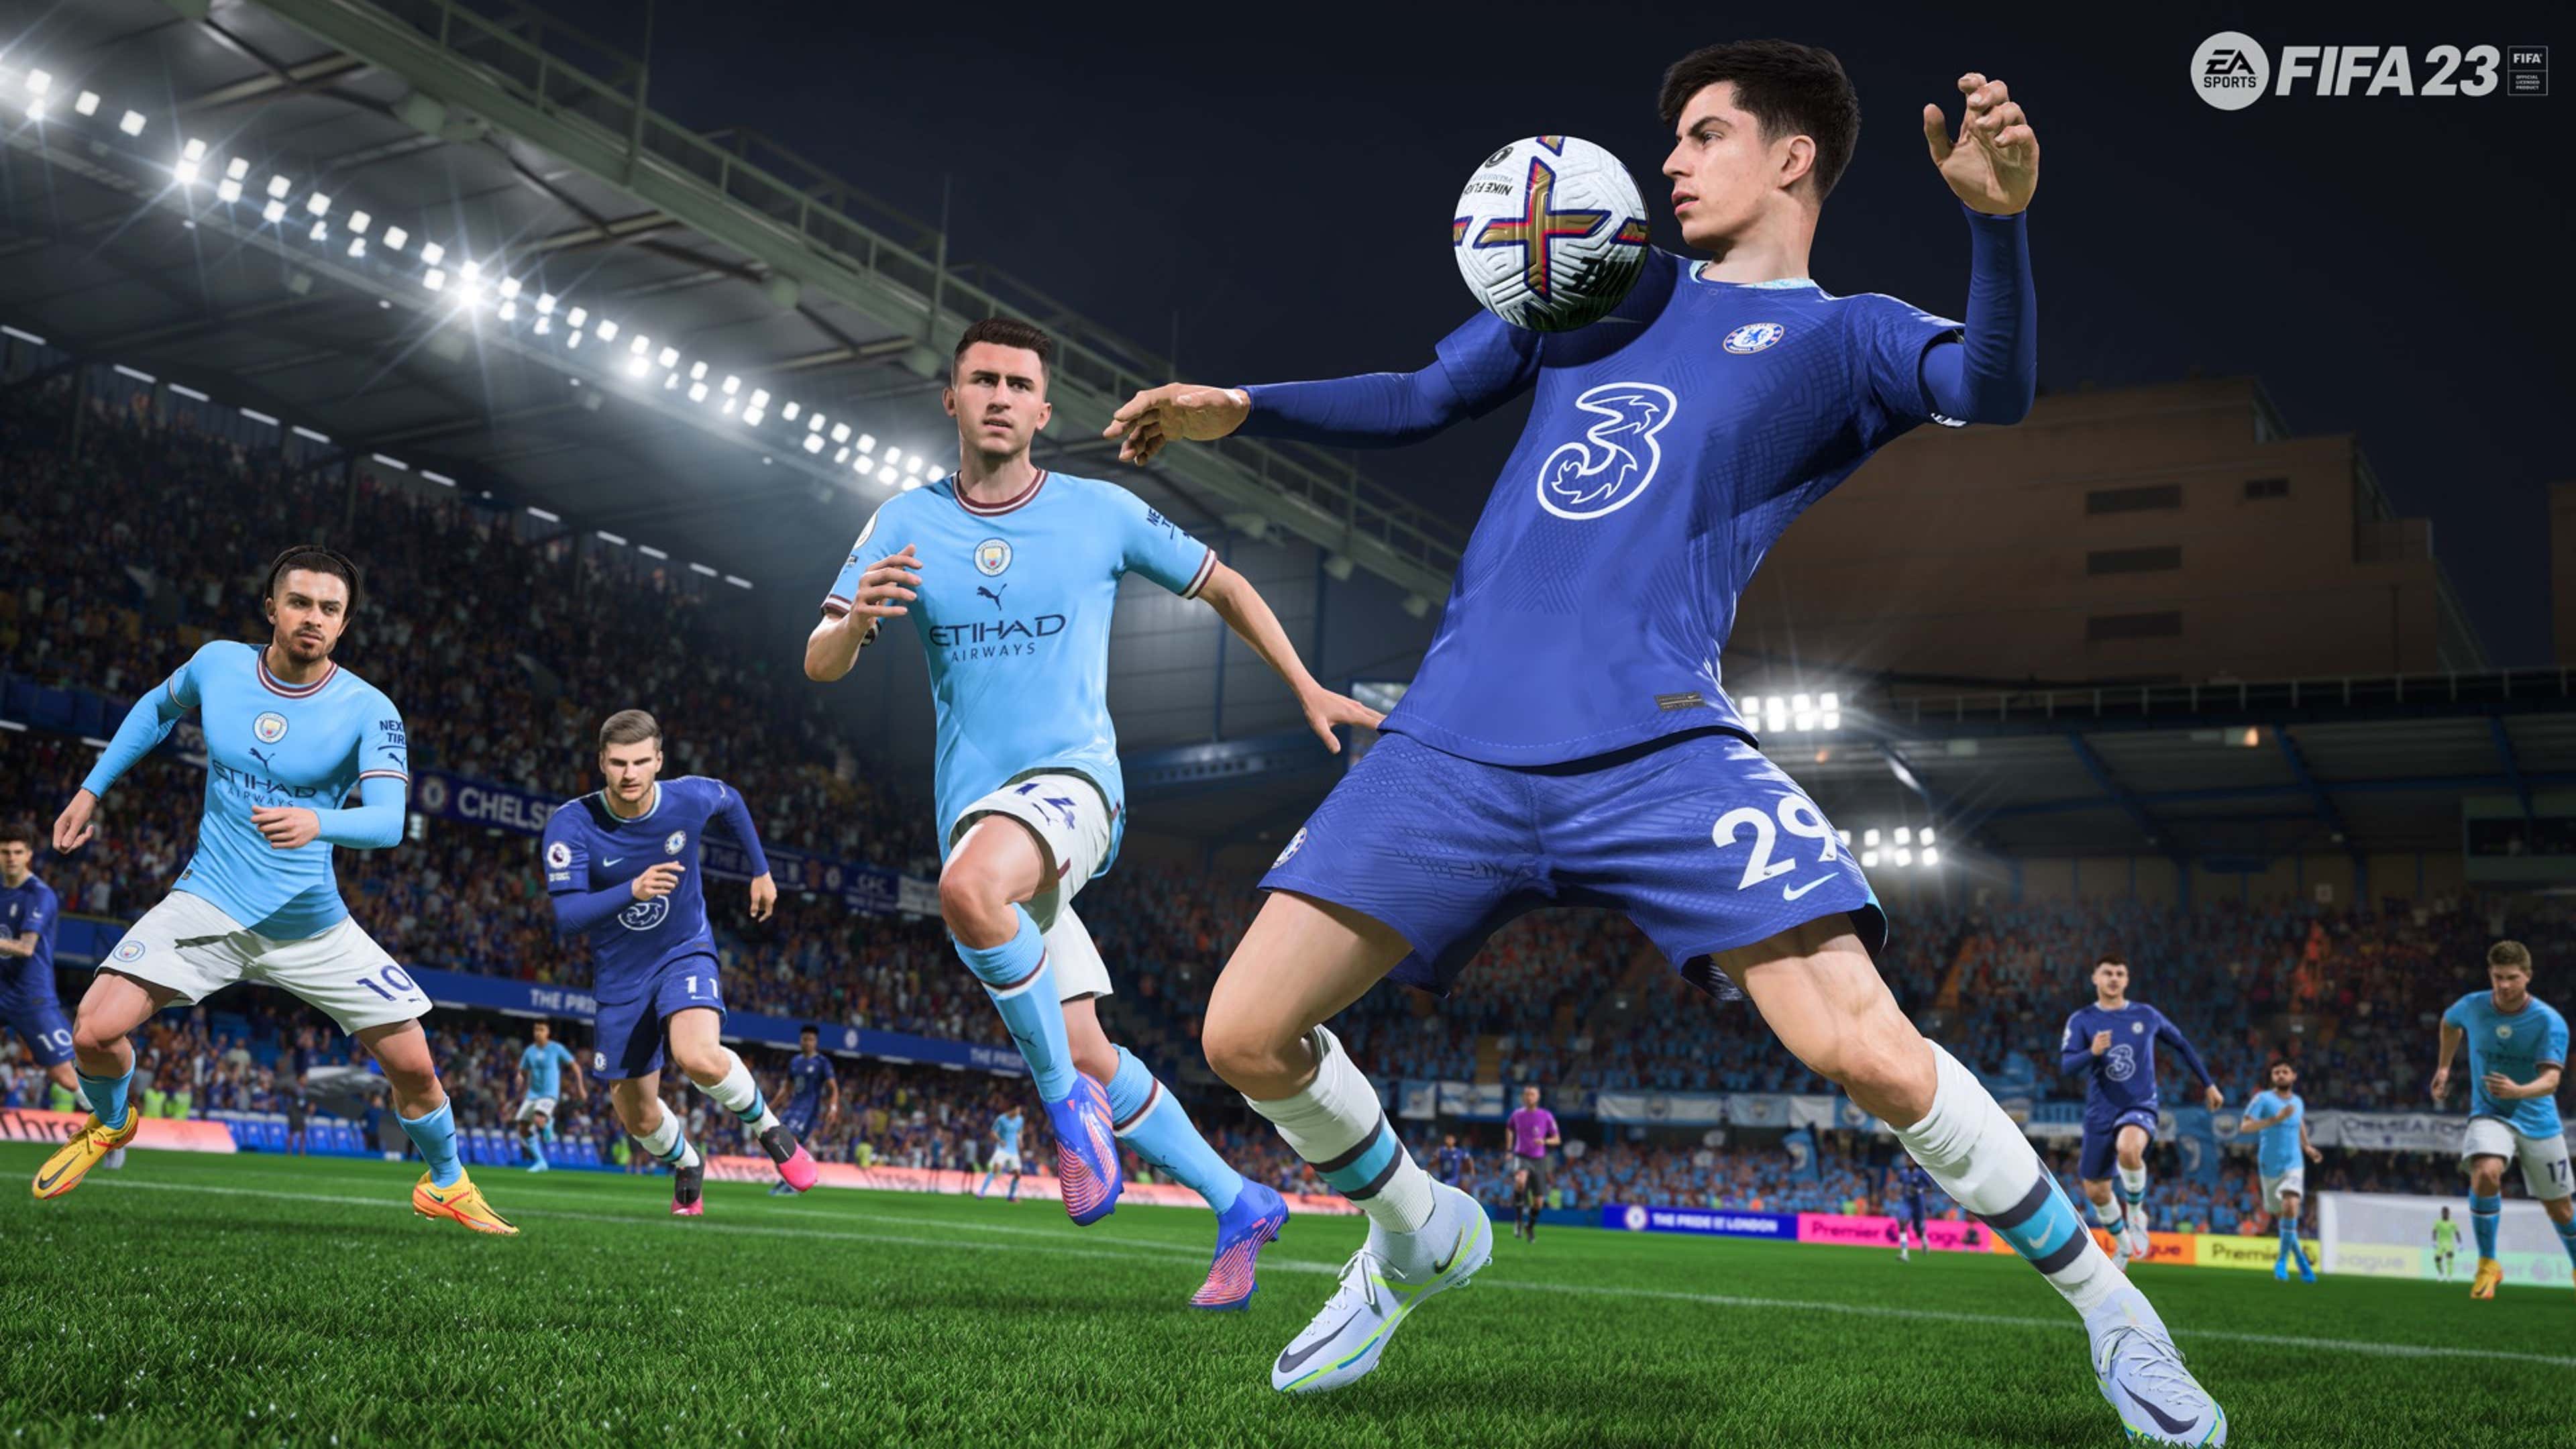 FIFA 23: Release dates, price, consoles, ratings, new features